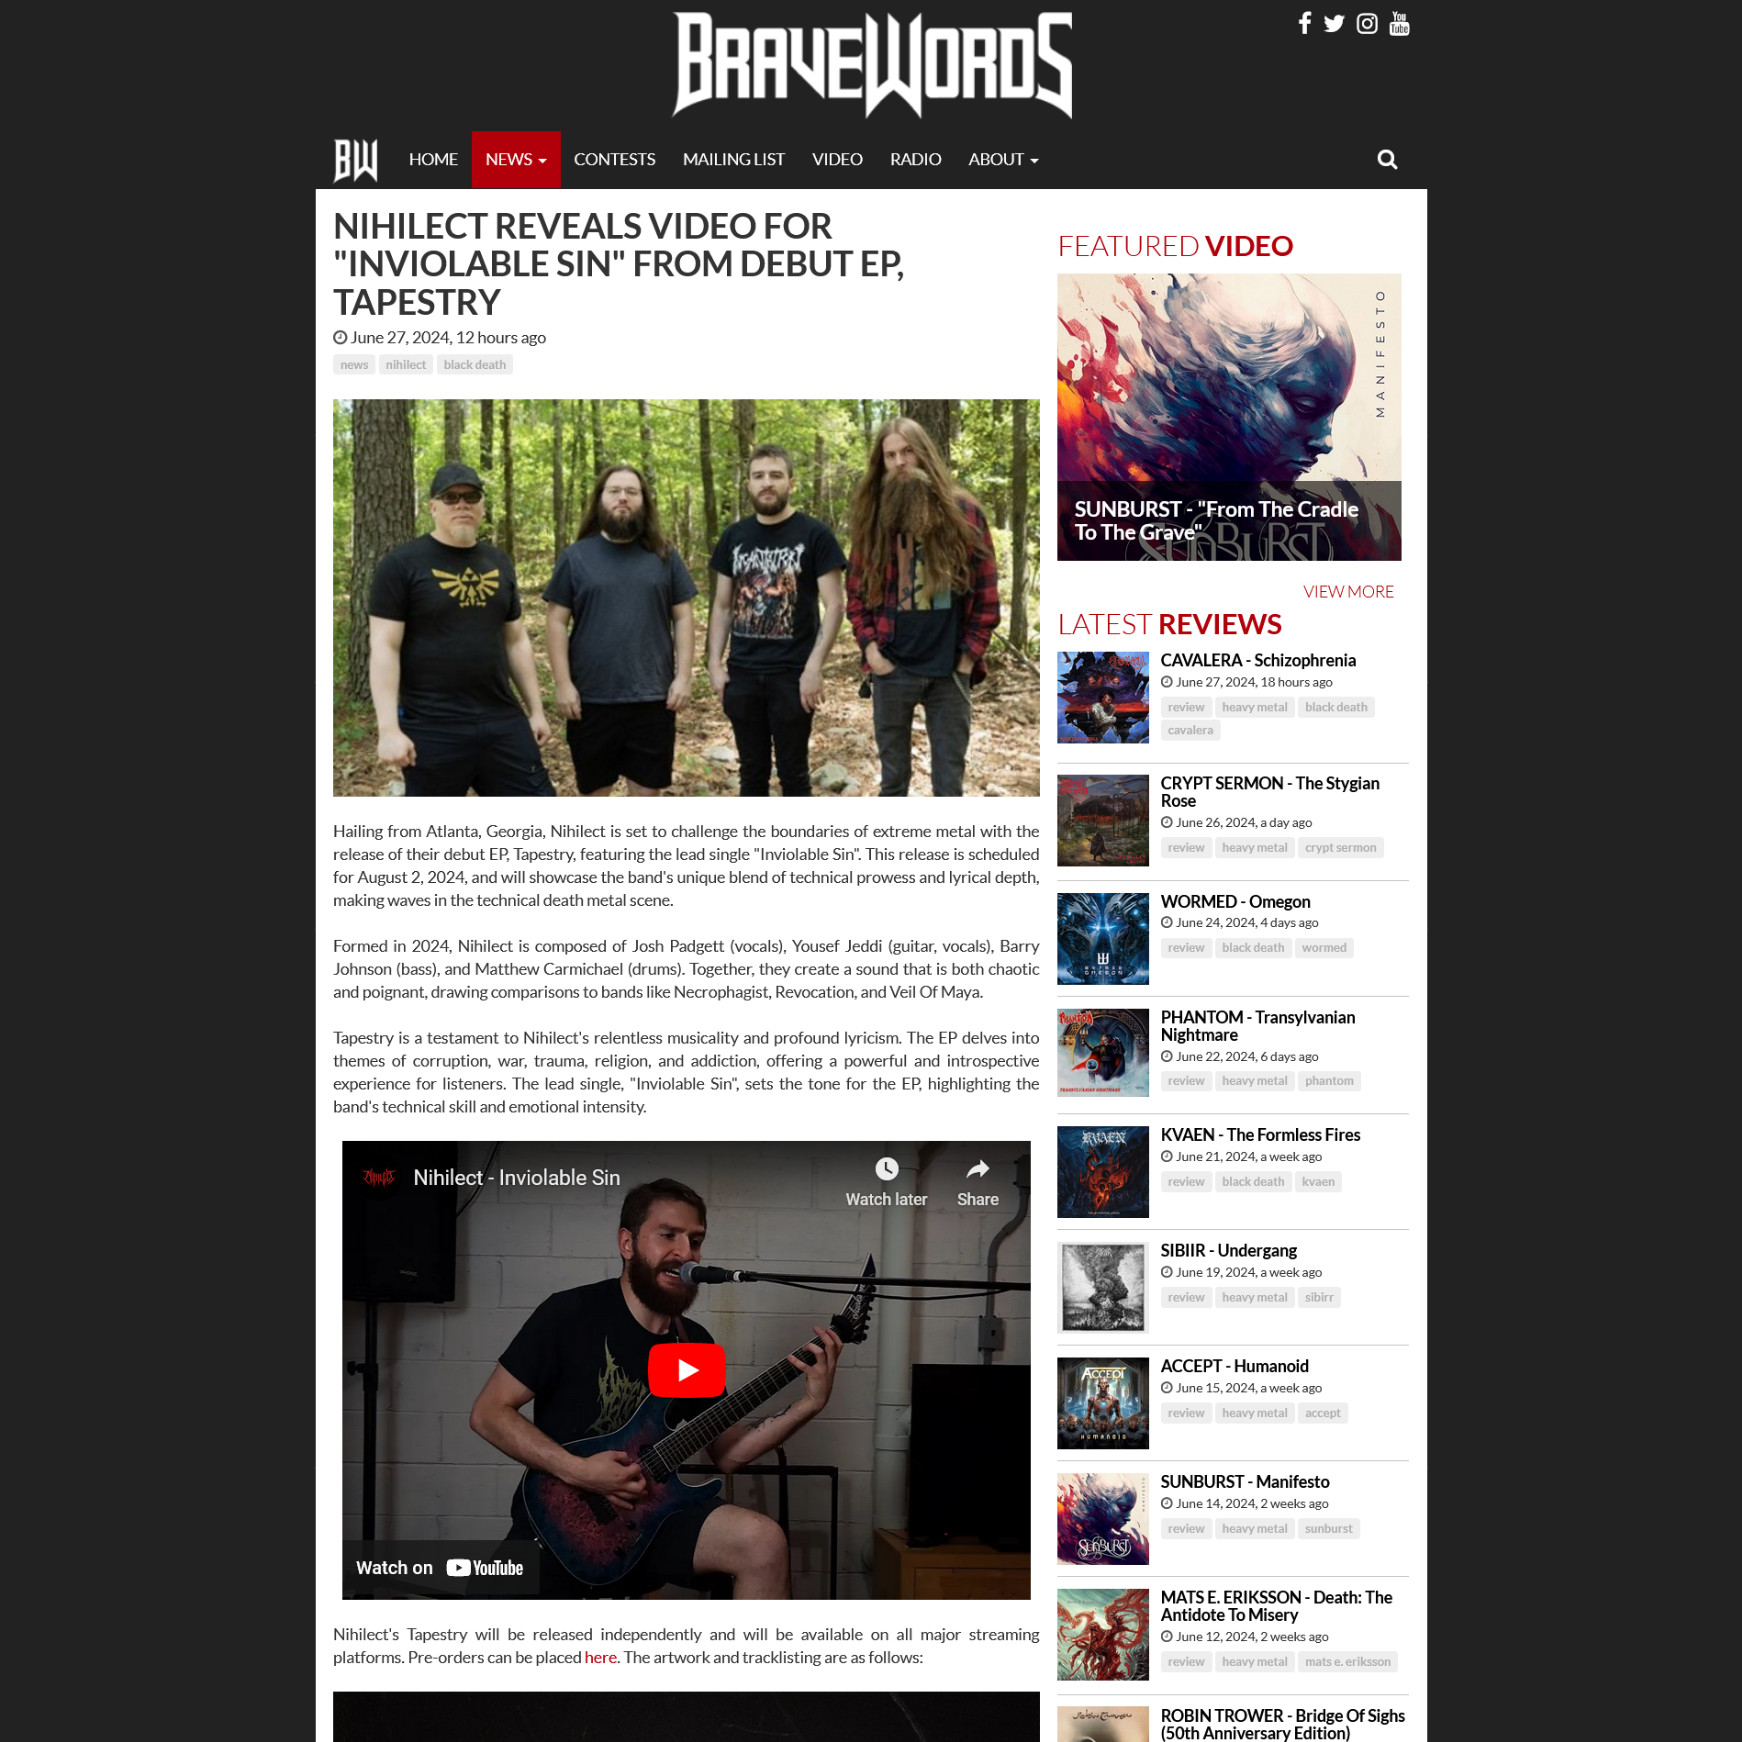 Screenshot 20240628 at 103245 NIHILECT Reveals Video For Inviolable Sin From Debut EP Tapestry  BraveWords.jpg